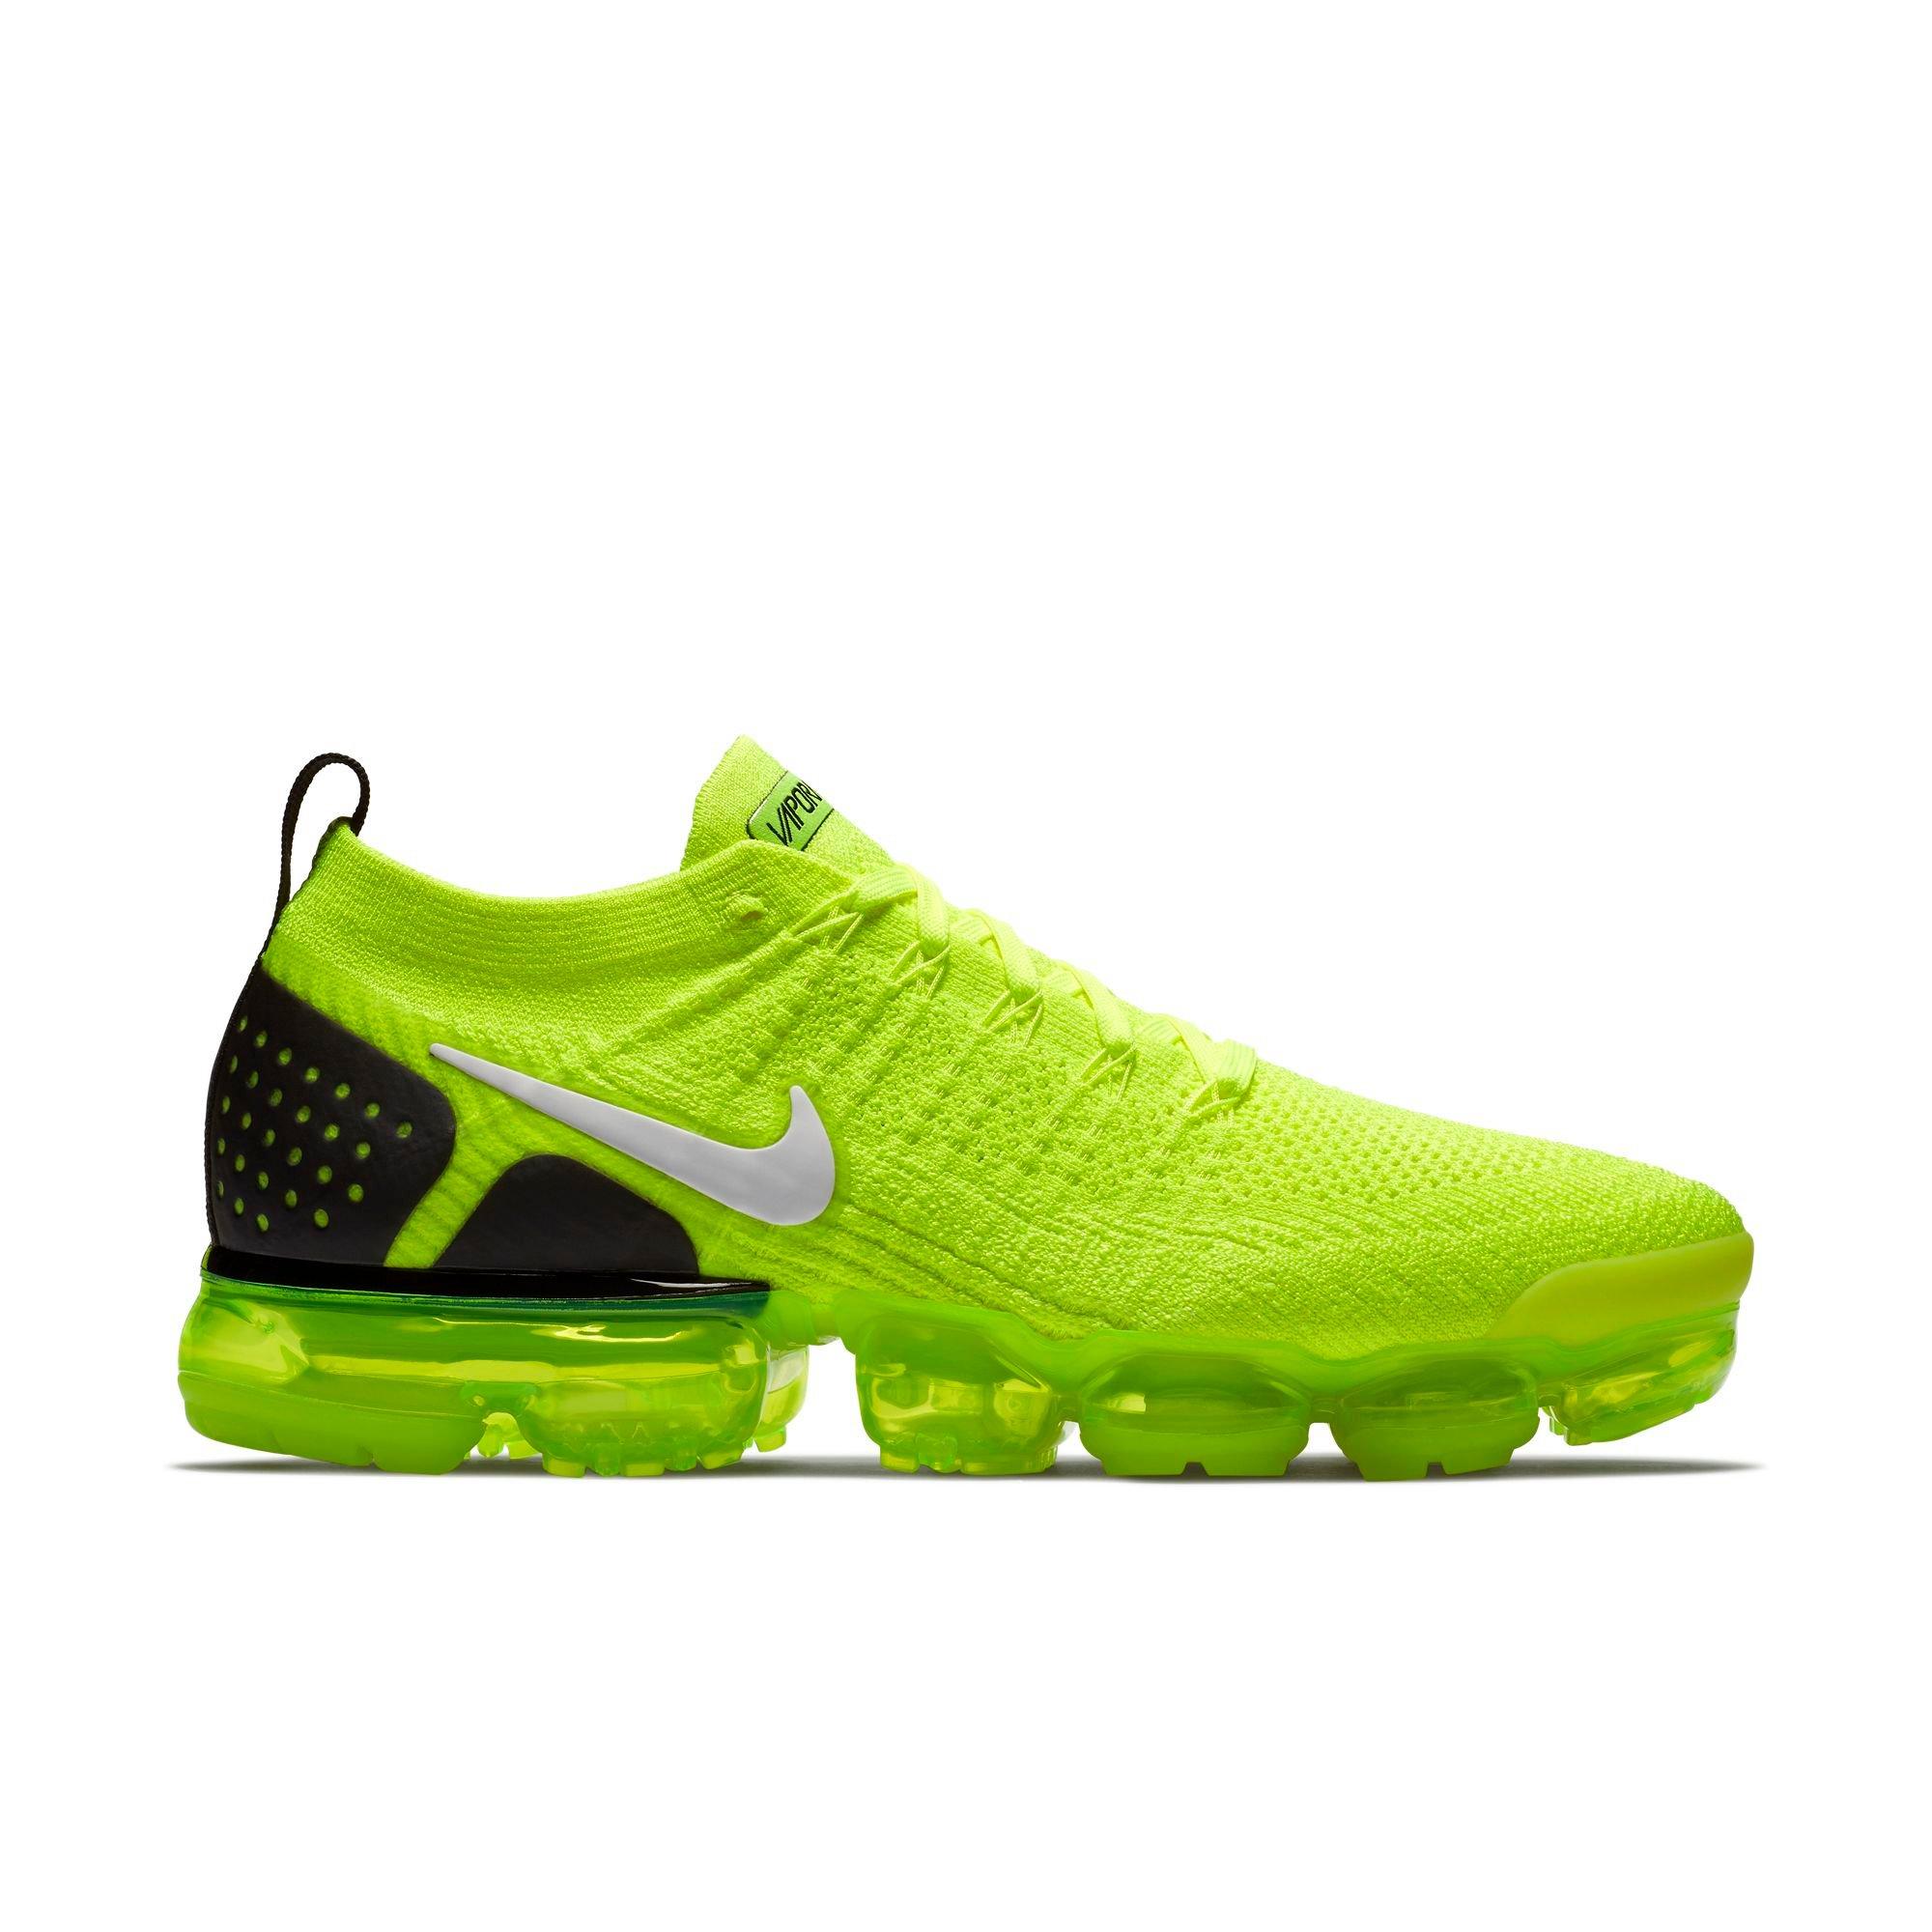 lime green and blue vapormax